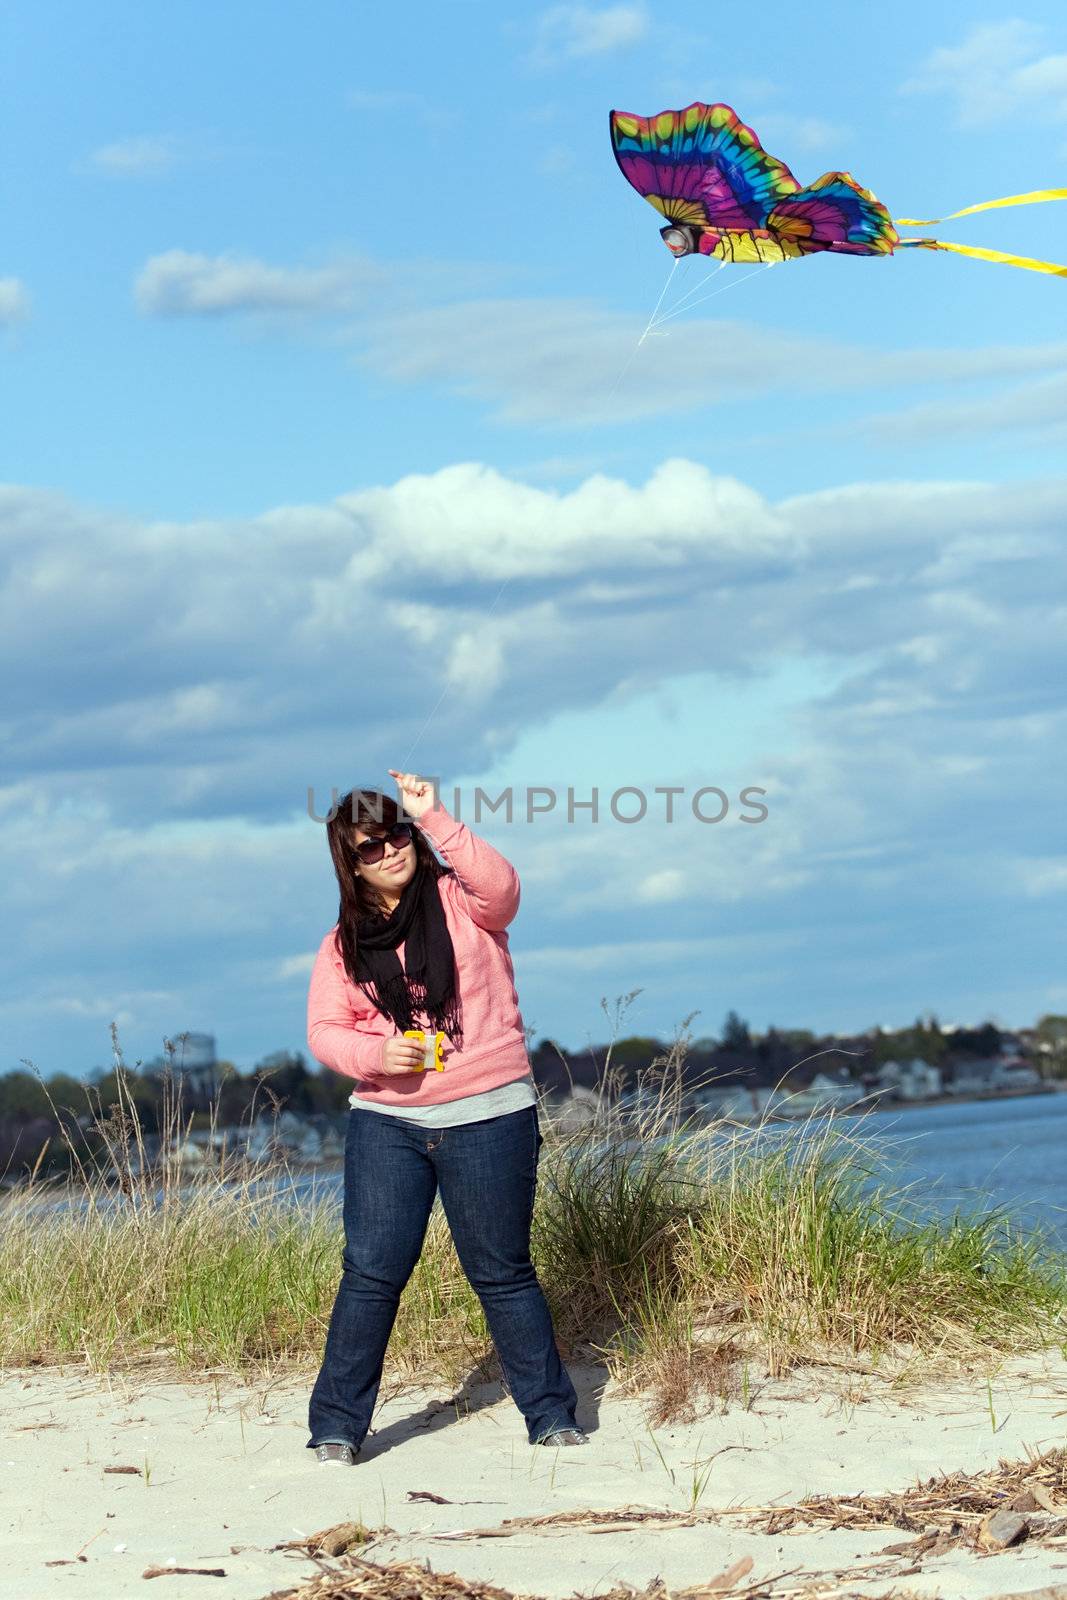 A young woman flying a kite at the sea shore on a nice day.